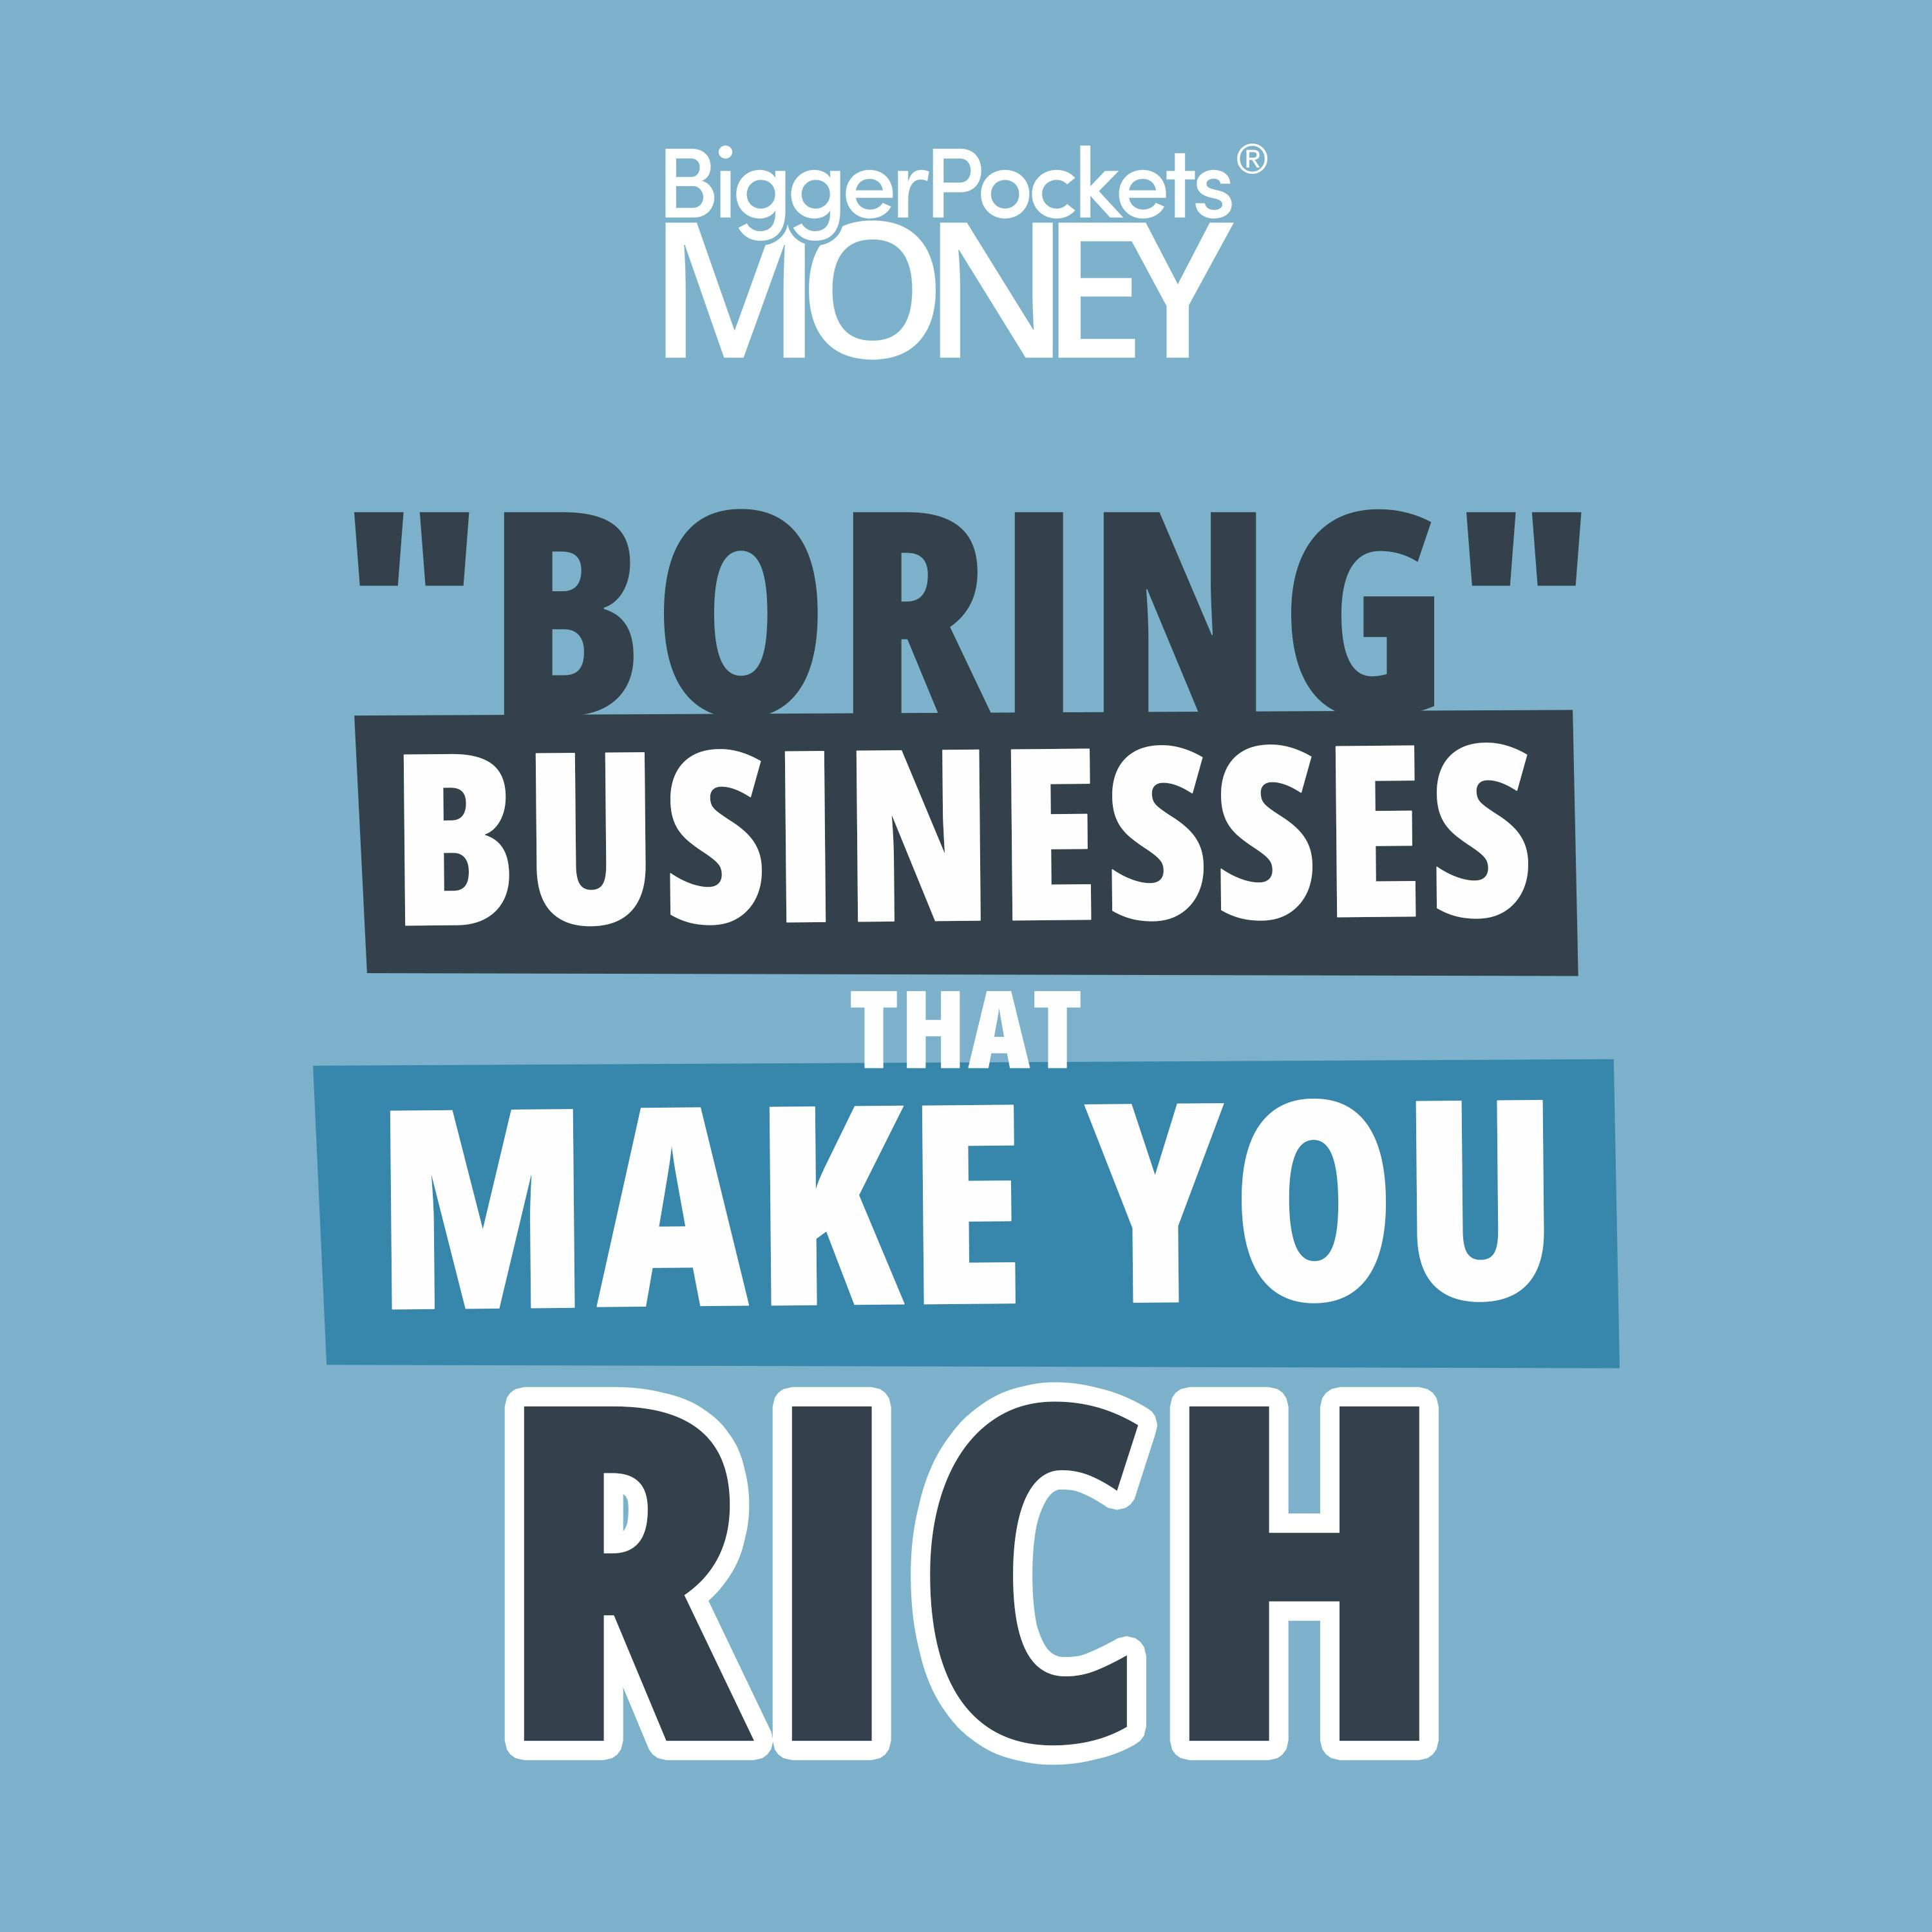 416: Codie Sanchez: These “Boring Businesses” Will Make You Rich